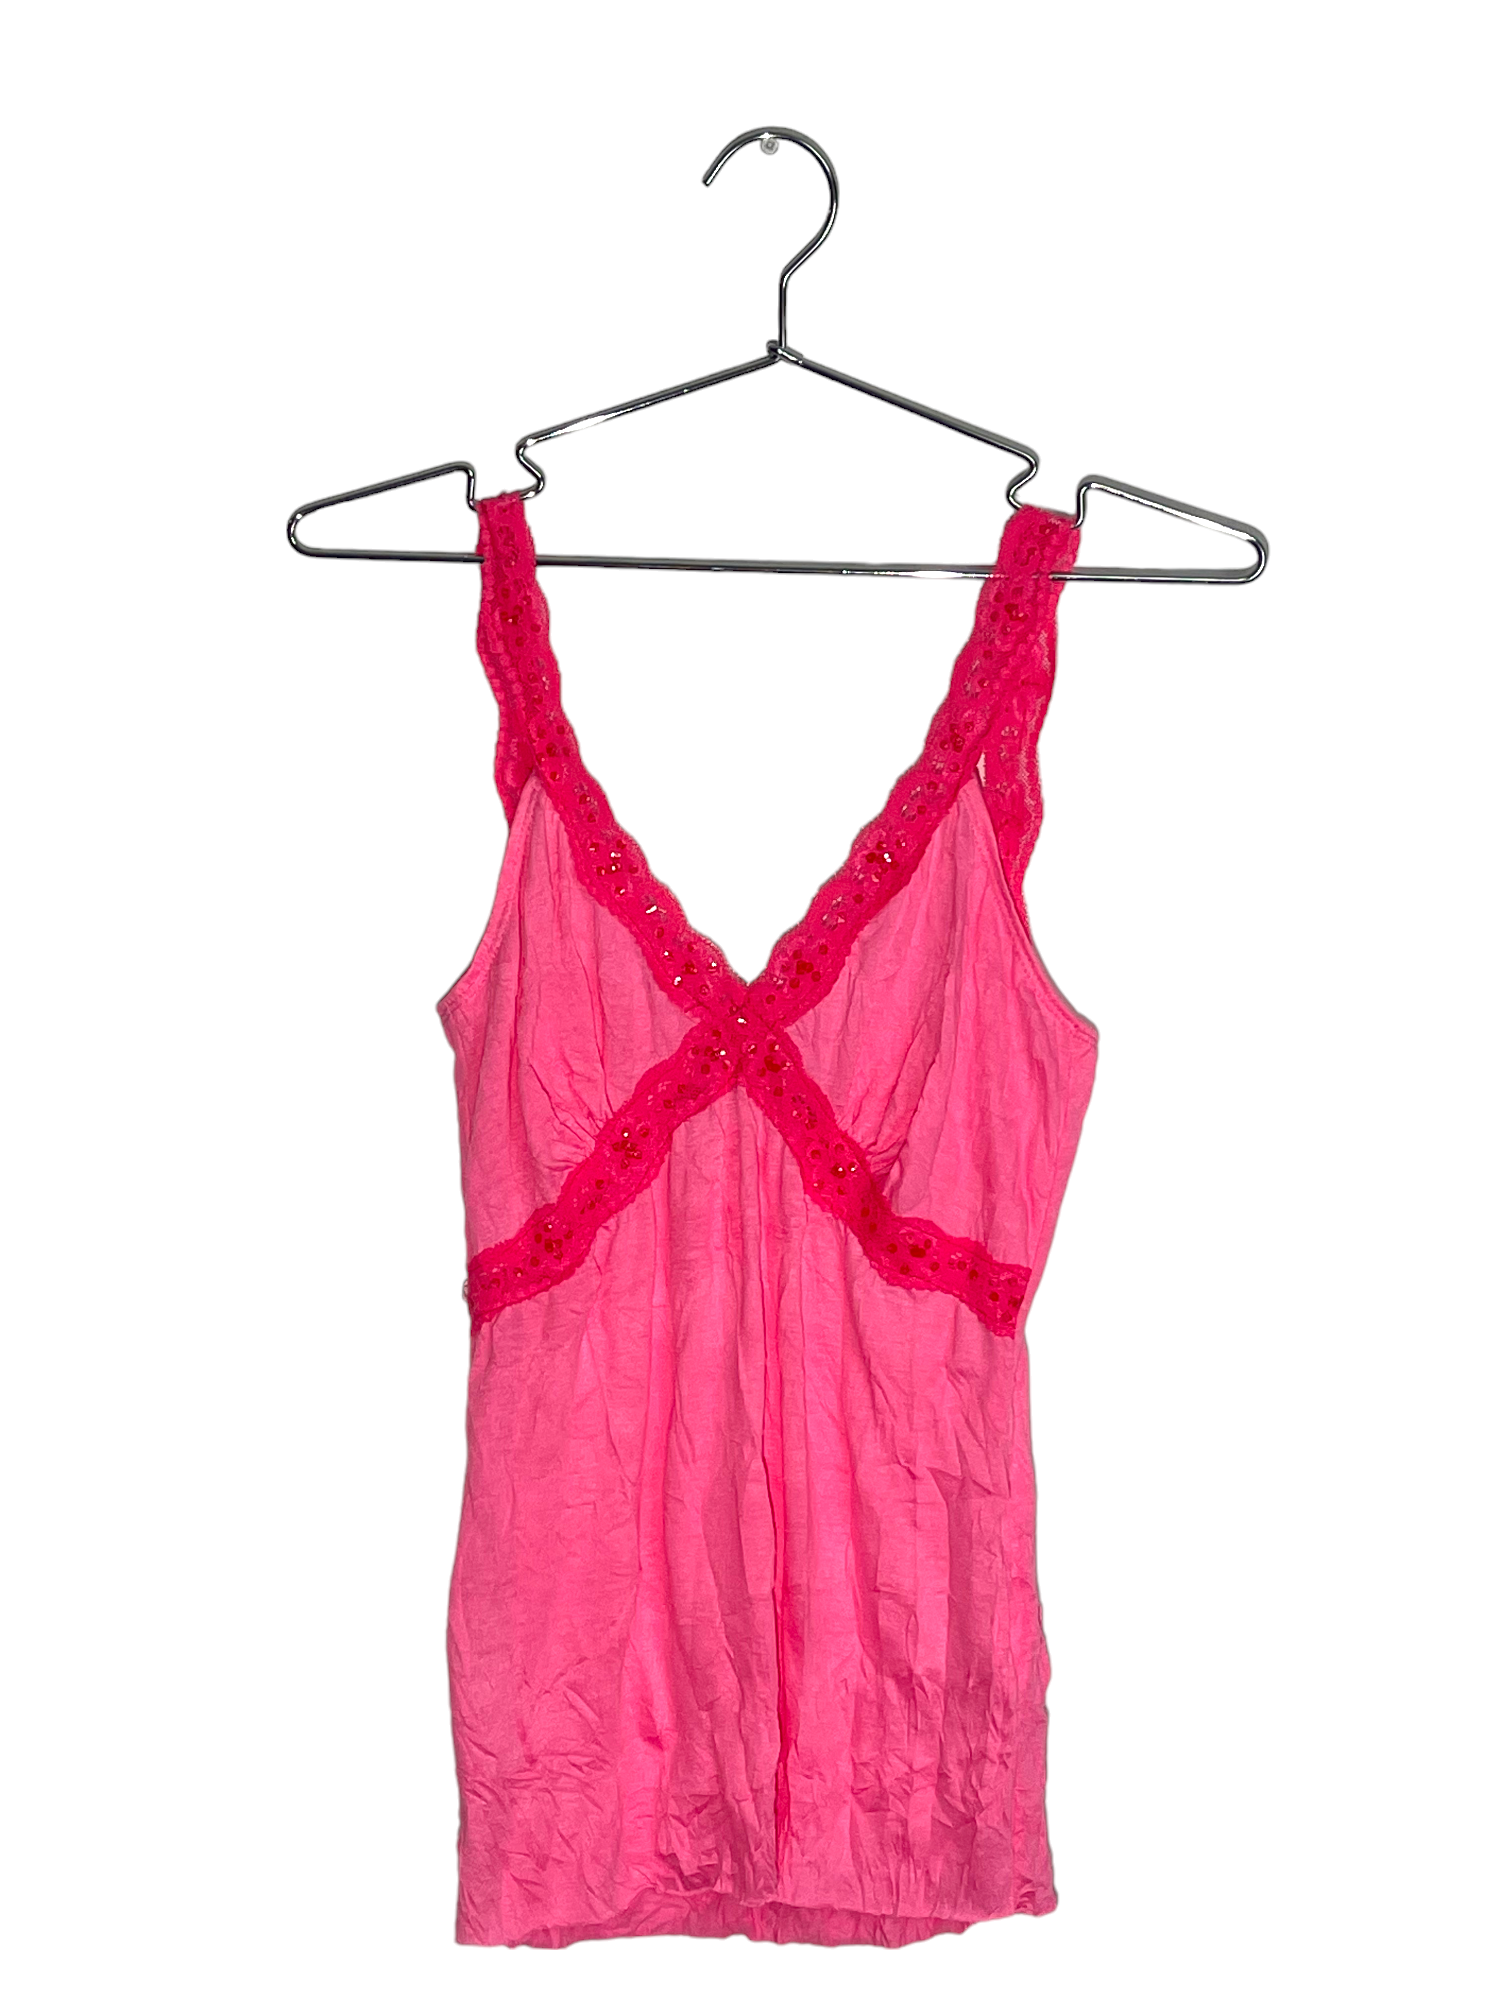 Neon Pink Cami Top With Lace